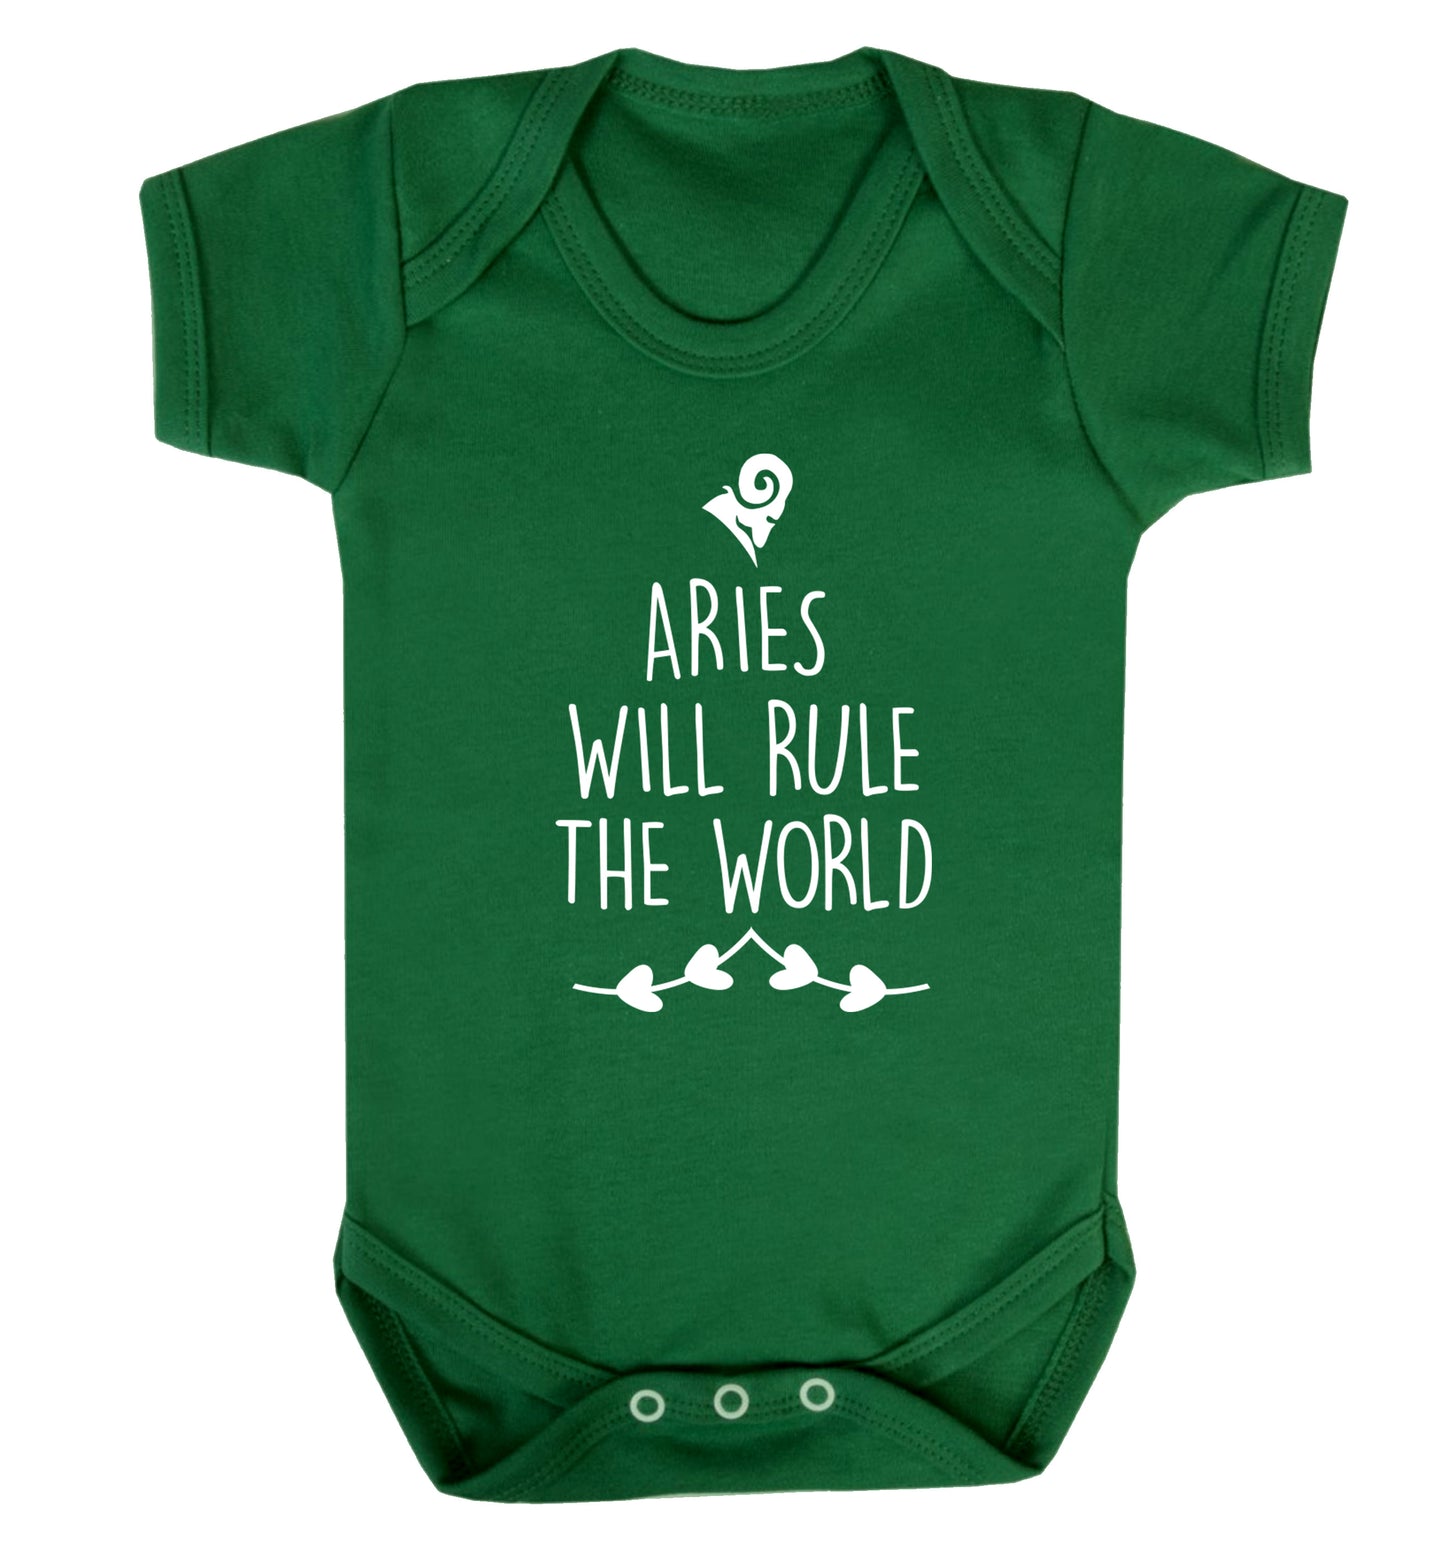 Aries will rule the world Baby Vest green 18-24 months